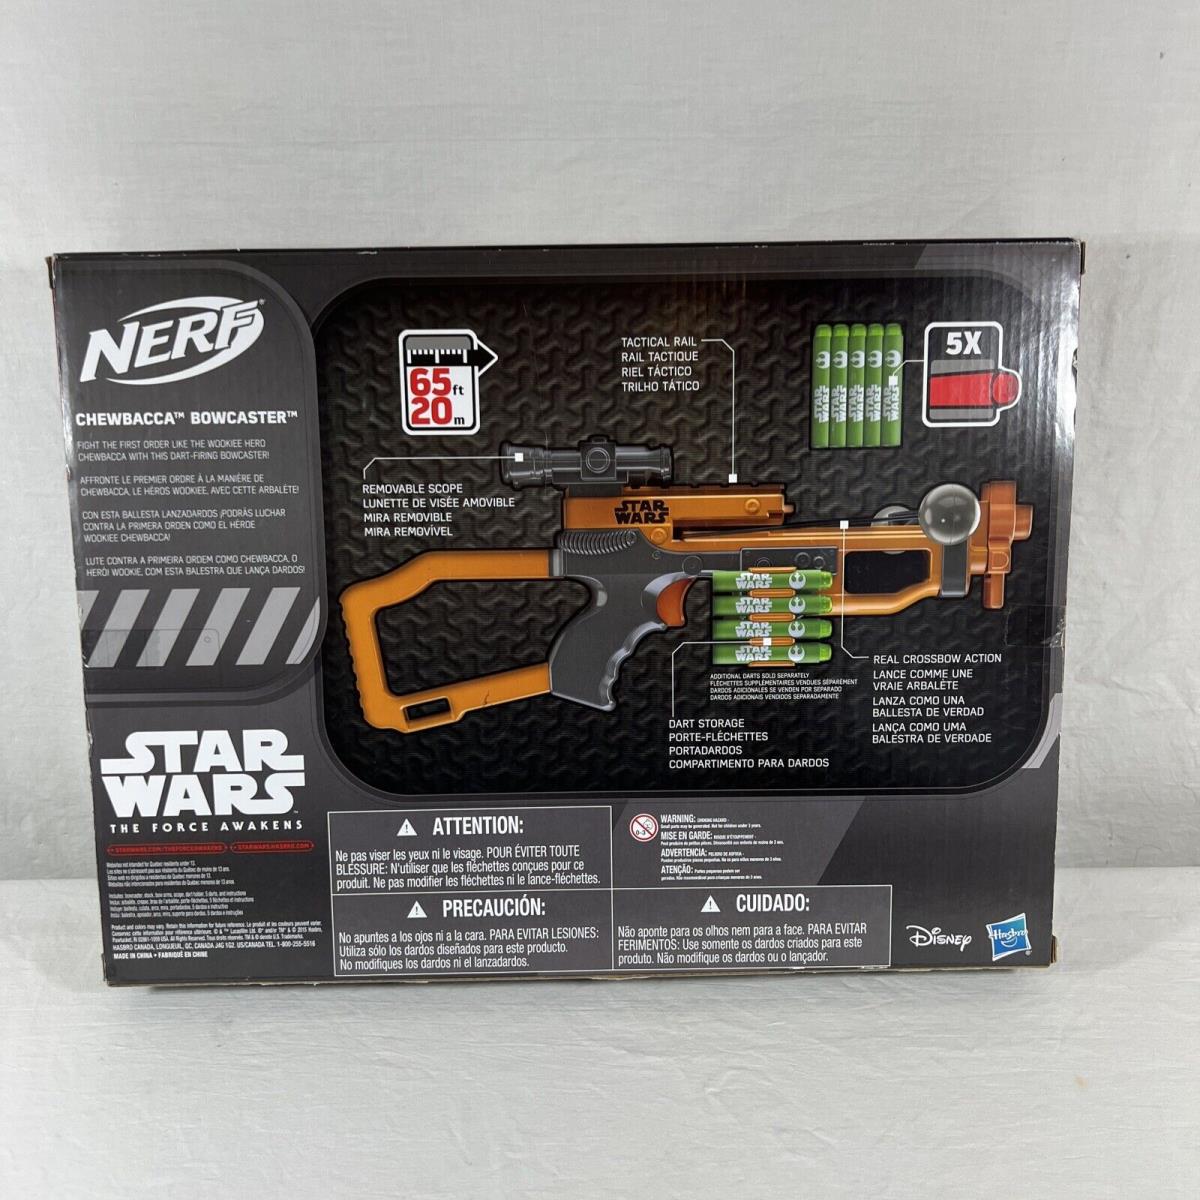 Star Wars The Force Awakens Nerf Episode Vii Chewbacca Bowcaster